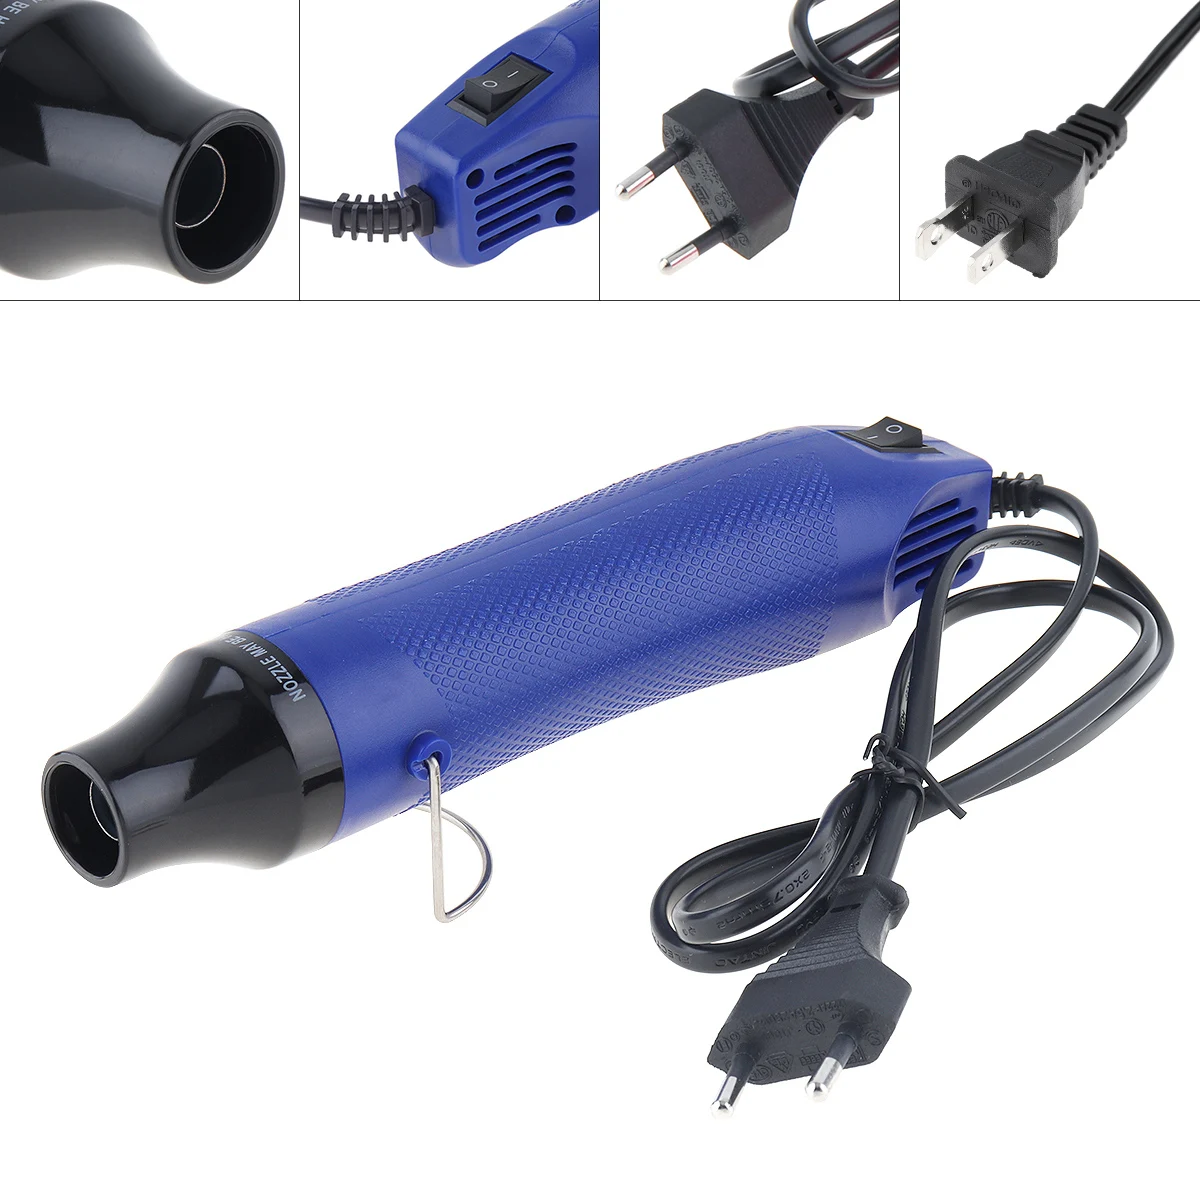 110V / 220V 300W Heat Gun Electric Blower Handmade with Shrink Plastic Surface and EU / US Plug for Heating DIY Accessories 150x100mm 300w 120v universal flexible silicone heater pad element engine oil pan heat chafer heater electric heating stampante